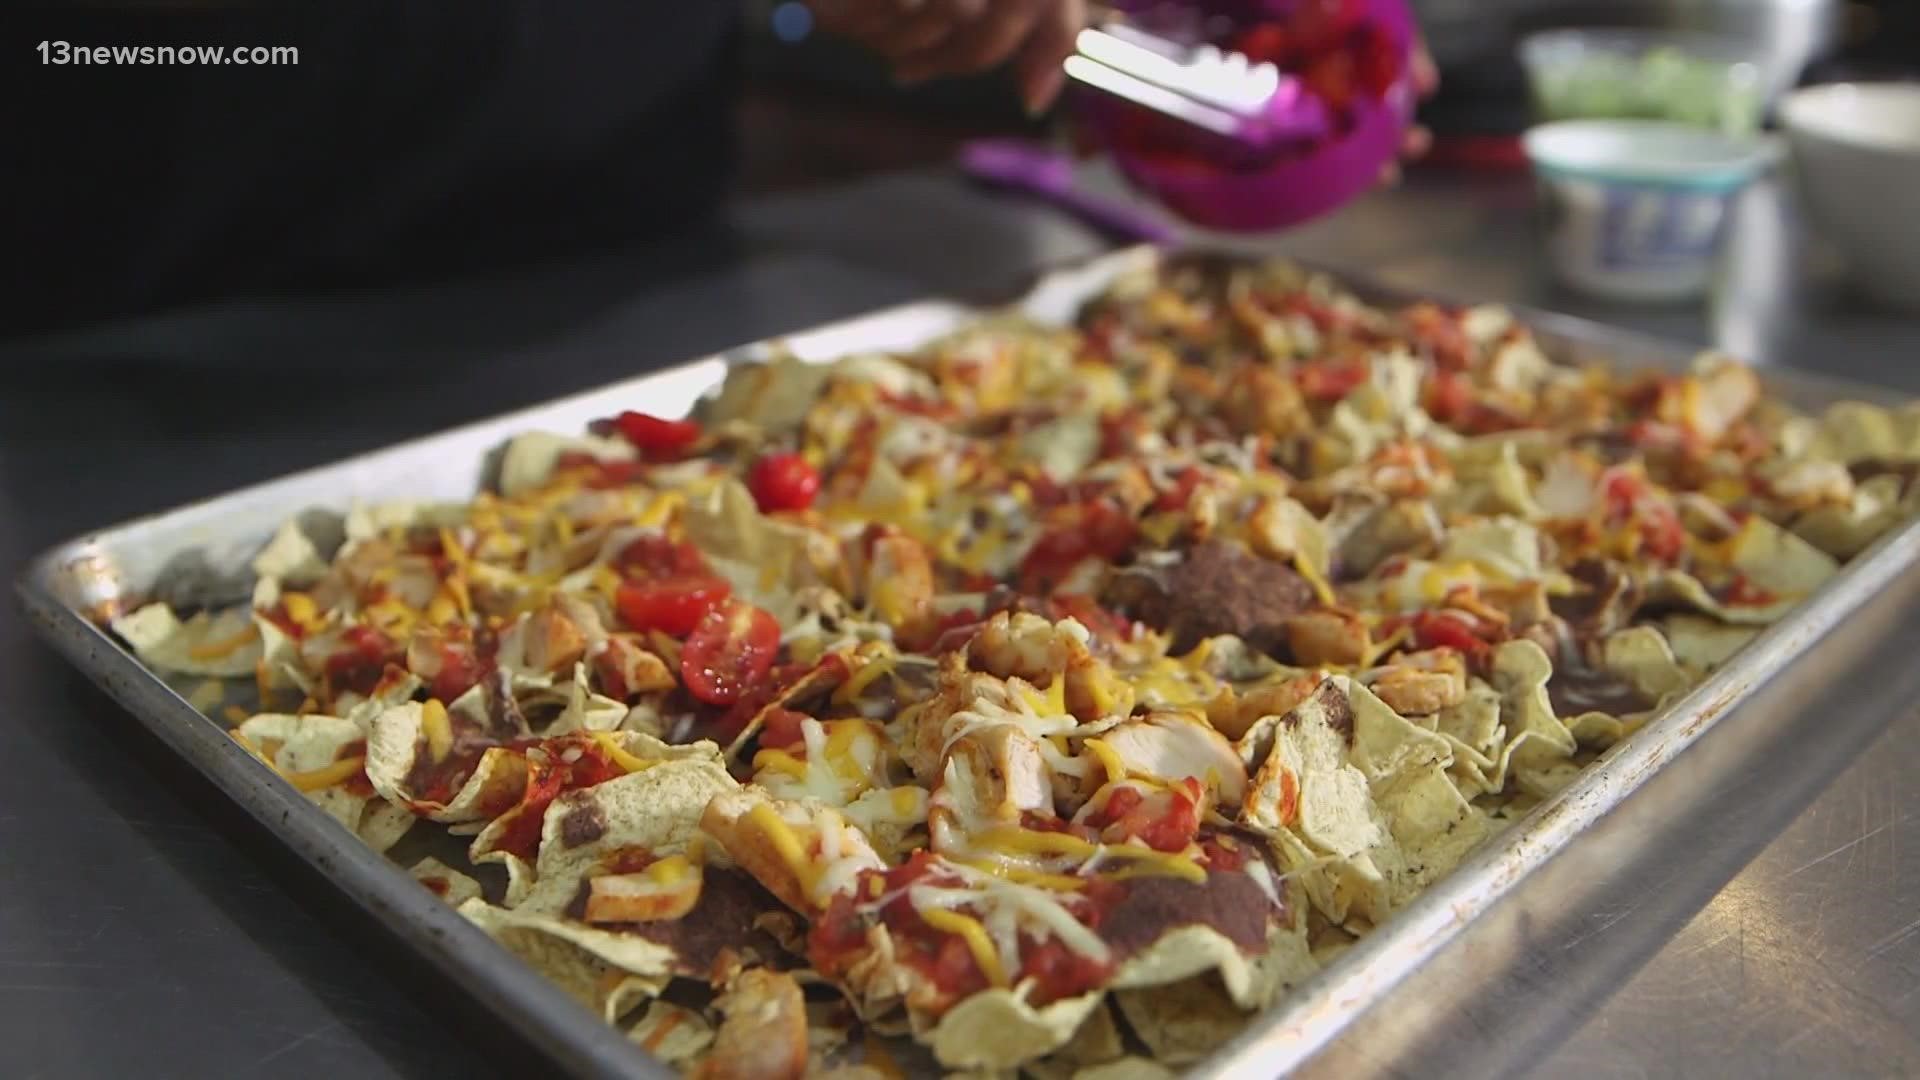 These nachos are delicious and healthier for you - with baked chips, chicken, and some lettuce and salsa!